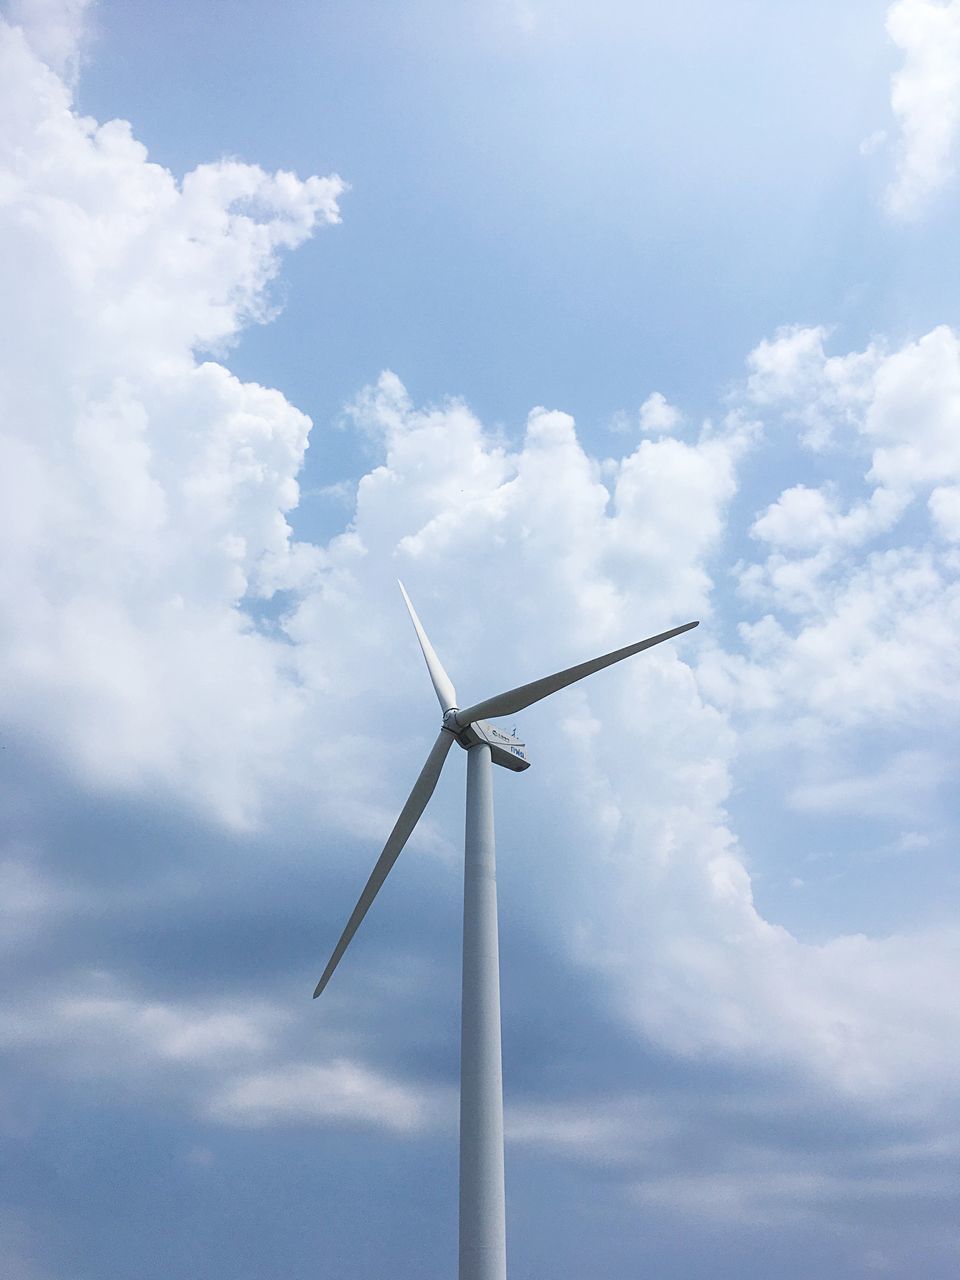 cloud - sky, wind turbine, environmental conservation, turbine, renewable energy, sky, wind power, alternative energy, low angle view, fuel and power generation, environment, day, nature, no people, technology, outdoors, sustainable resources, sunlight, tall - high, white color